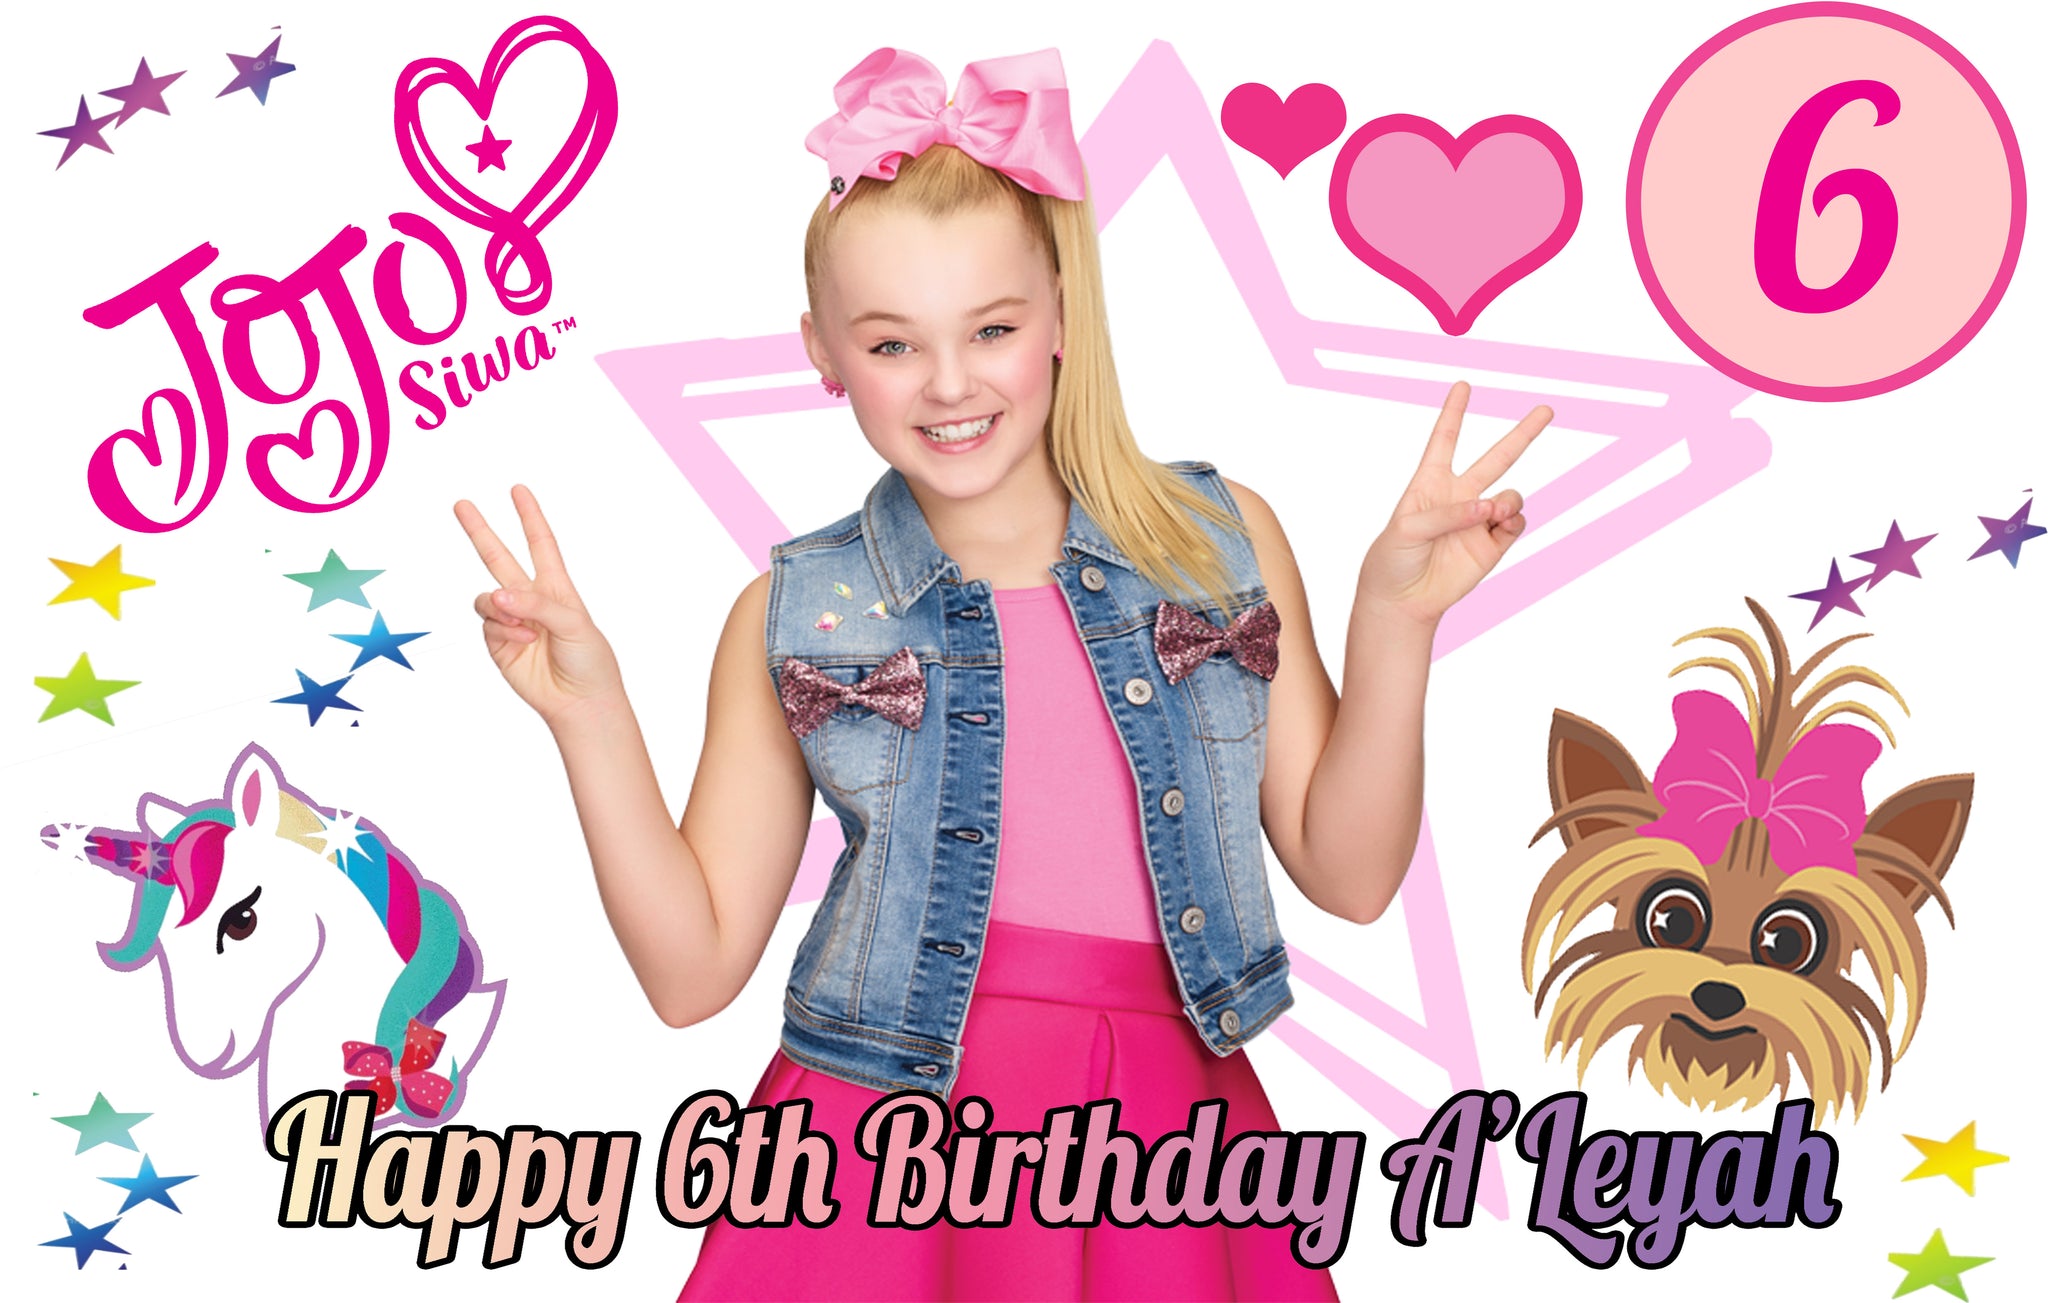 JoJo Siwa with Dog Personalized Edible Print Premium Cake Toppers Frosting Sheets 5 Sizes